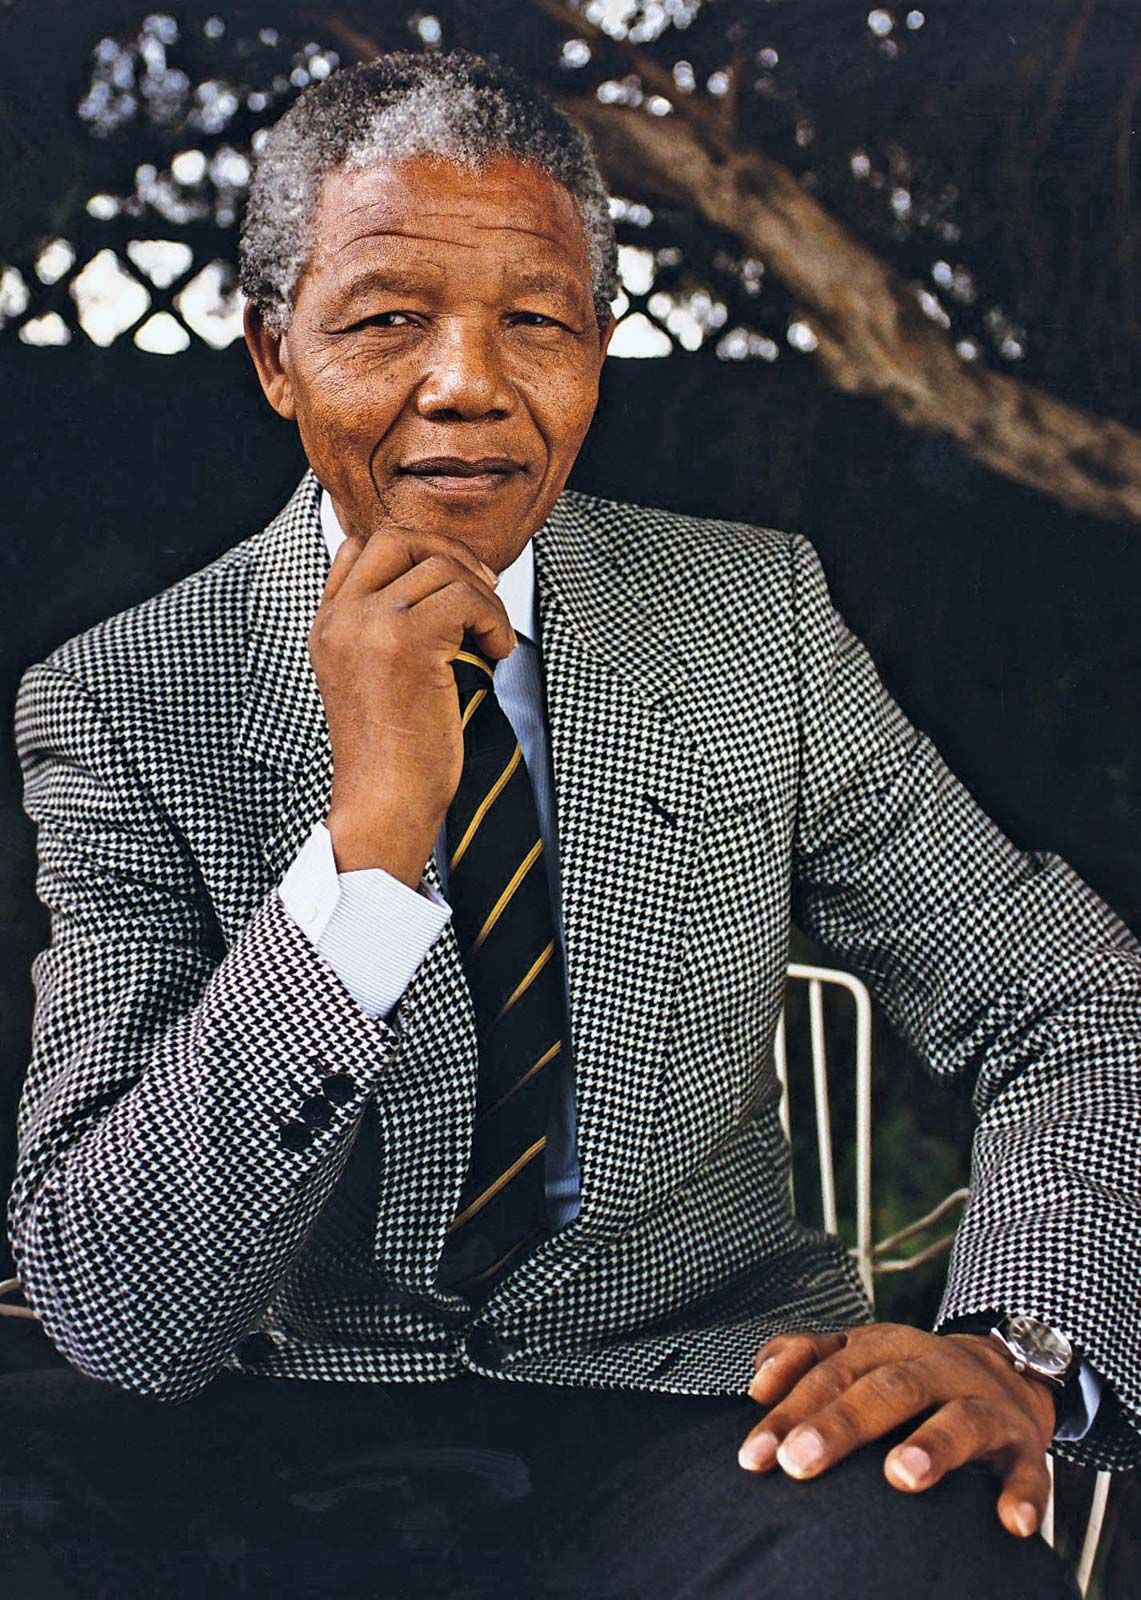 Auction of Mandela’s artefacts suspended as SA preserves heritage